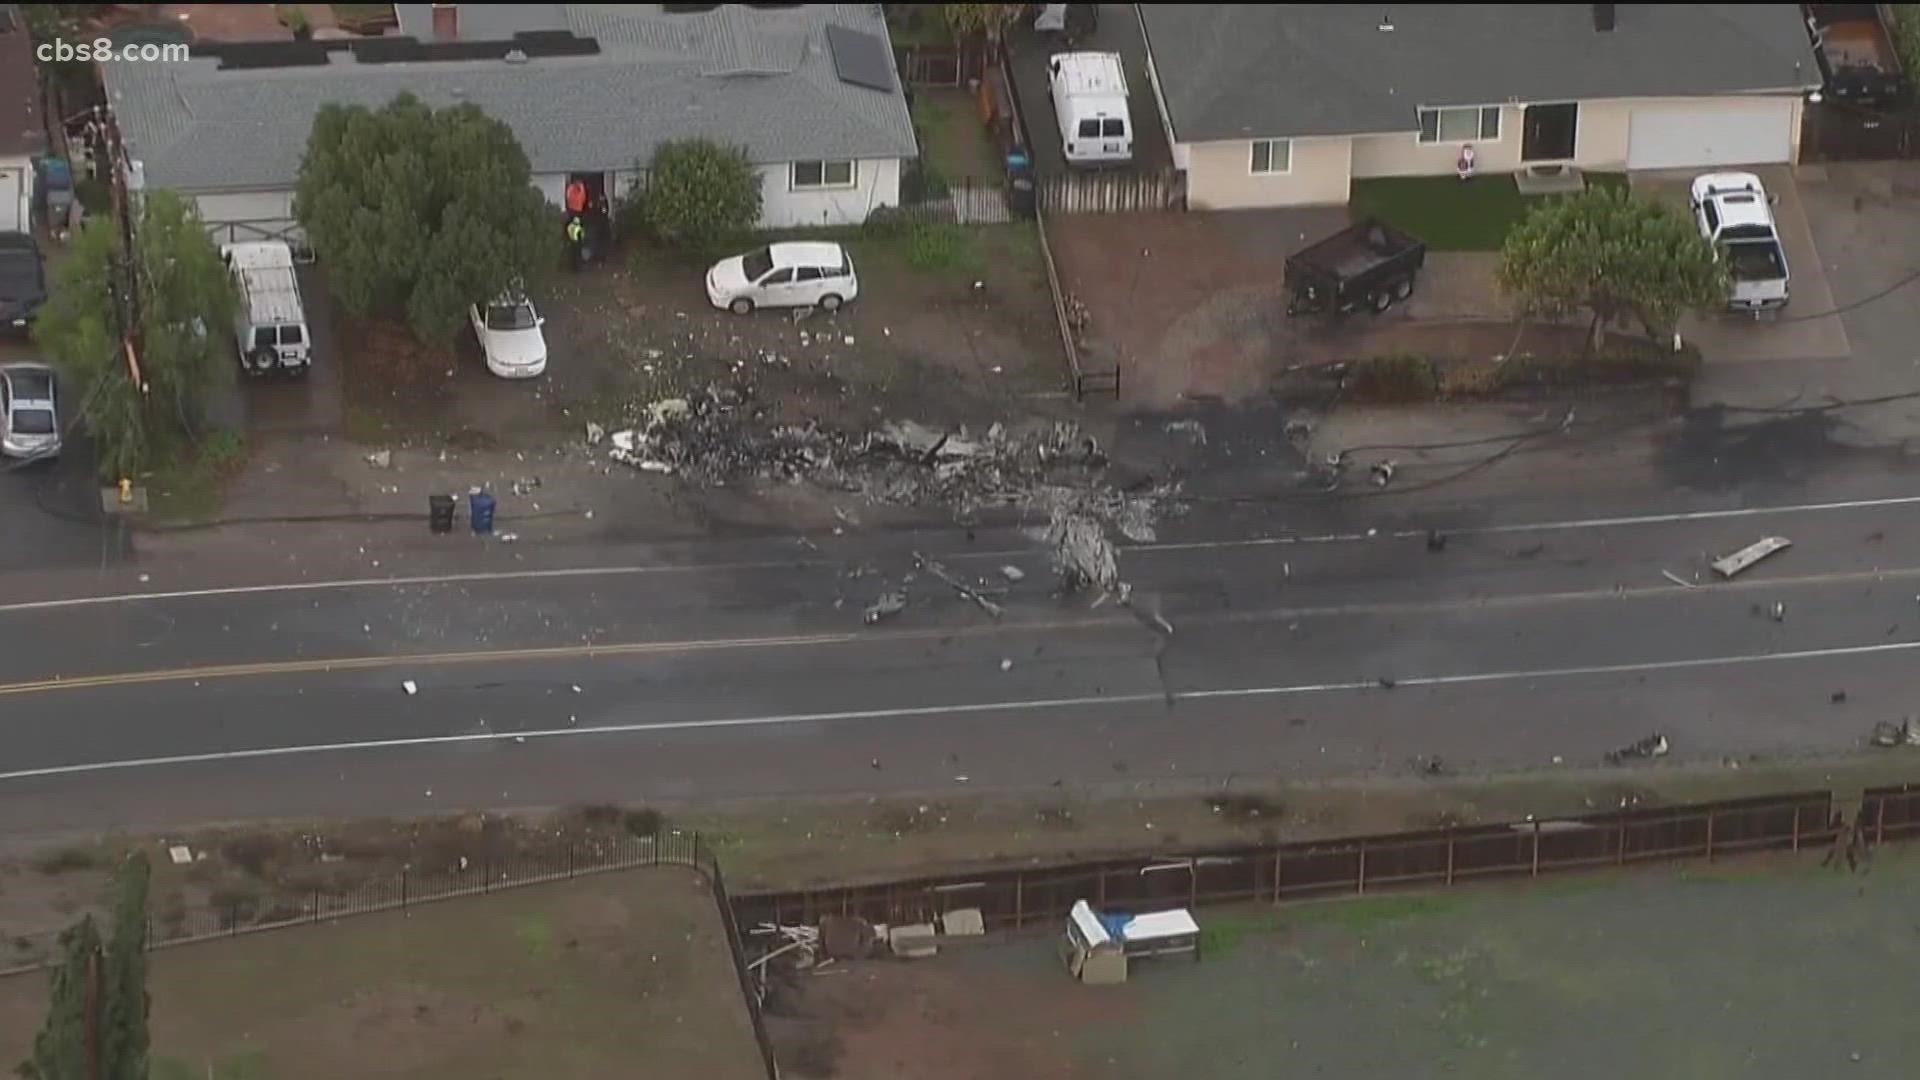 Authorities said they found no survivors of the crash in the El Cajon area. Four people were on board the plane.